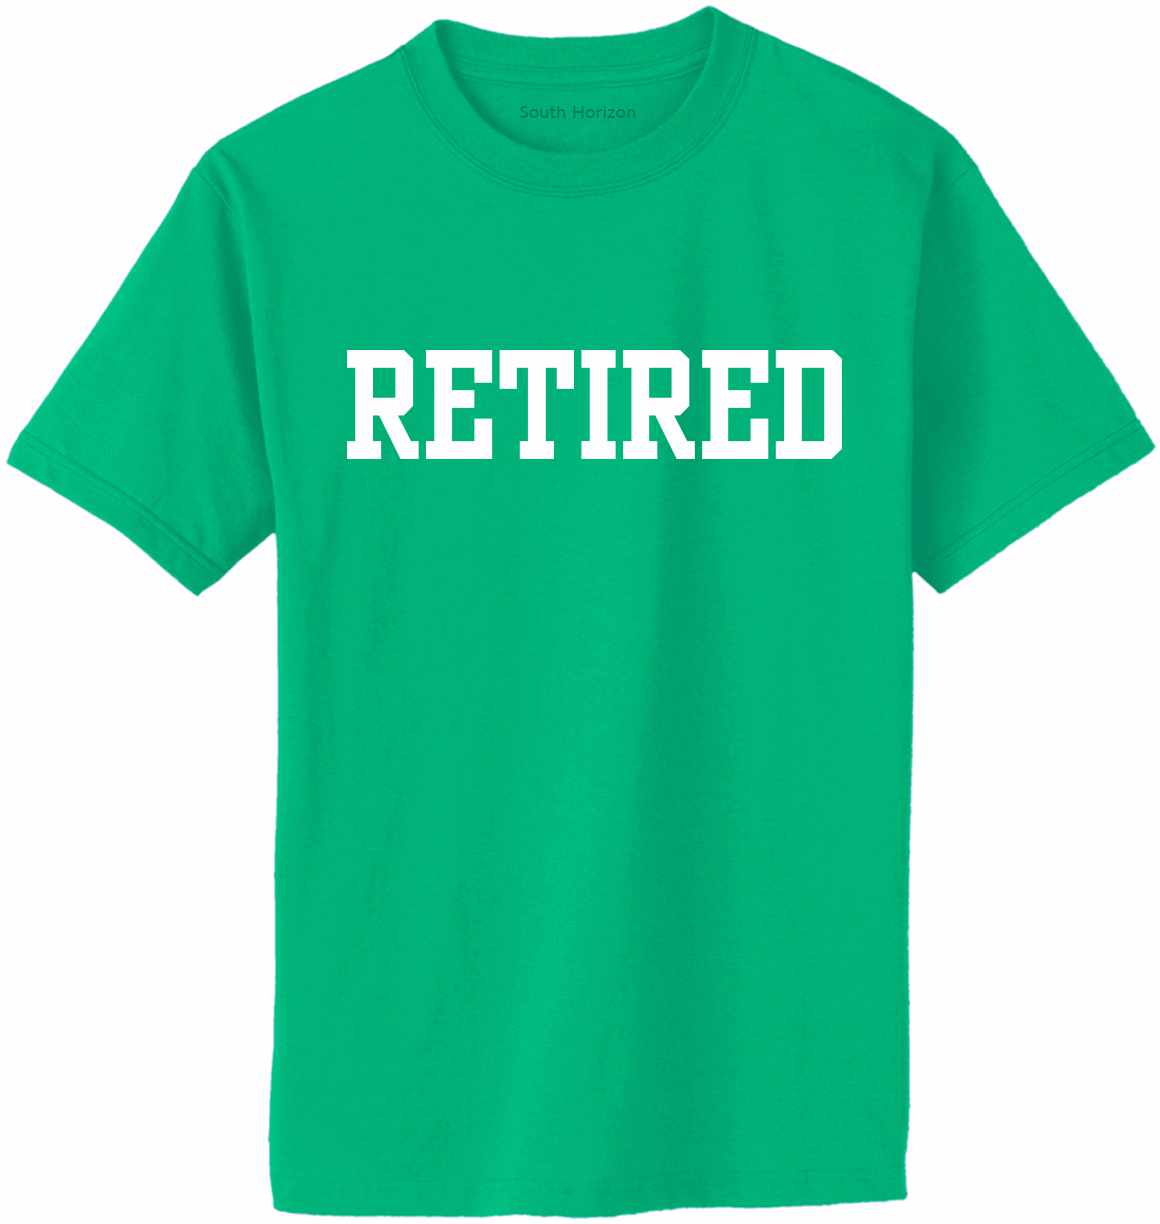 RETIRED on Adult T-Shirt